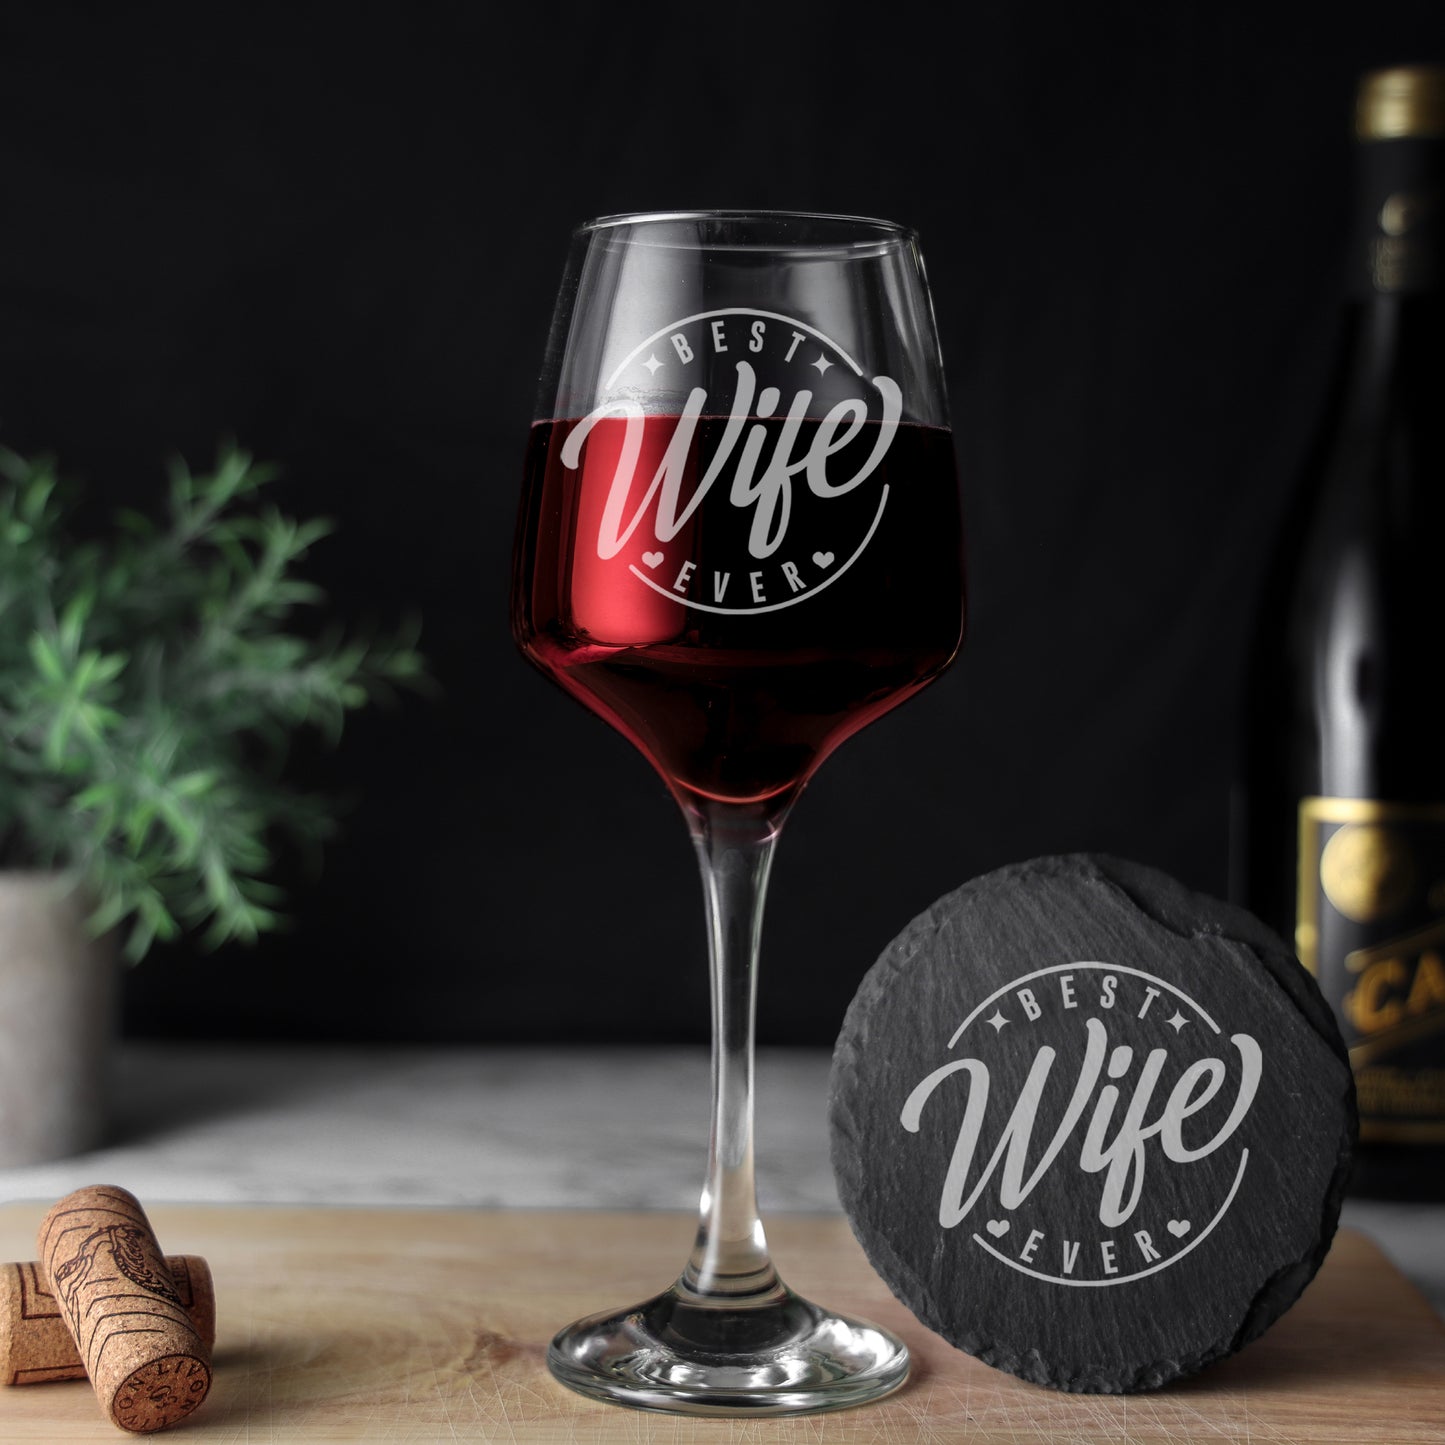 Best Wife Ever Engraved Wine Glass and/or Coaster Gift  - Always Looking Good - Glass & Round Coaster  